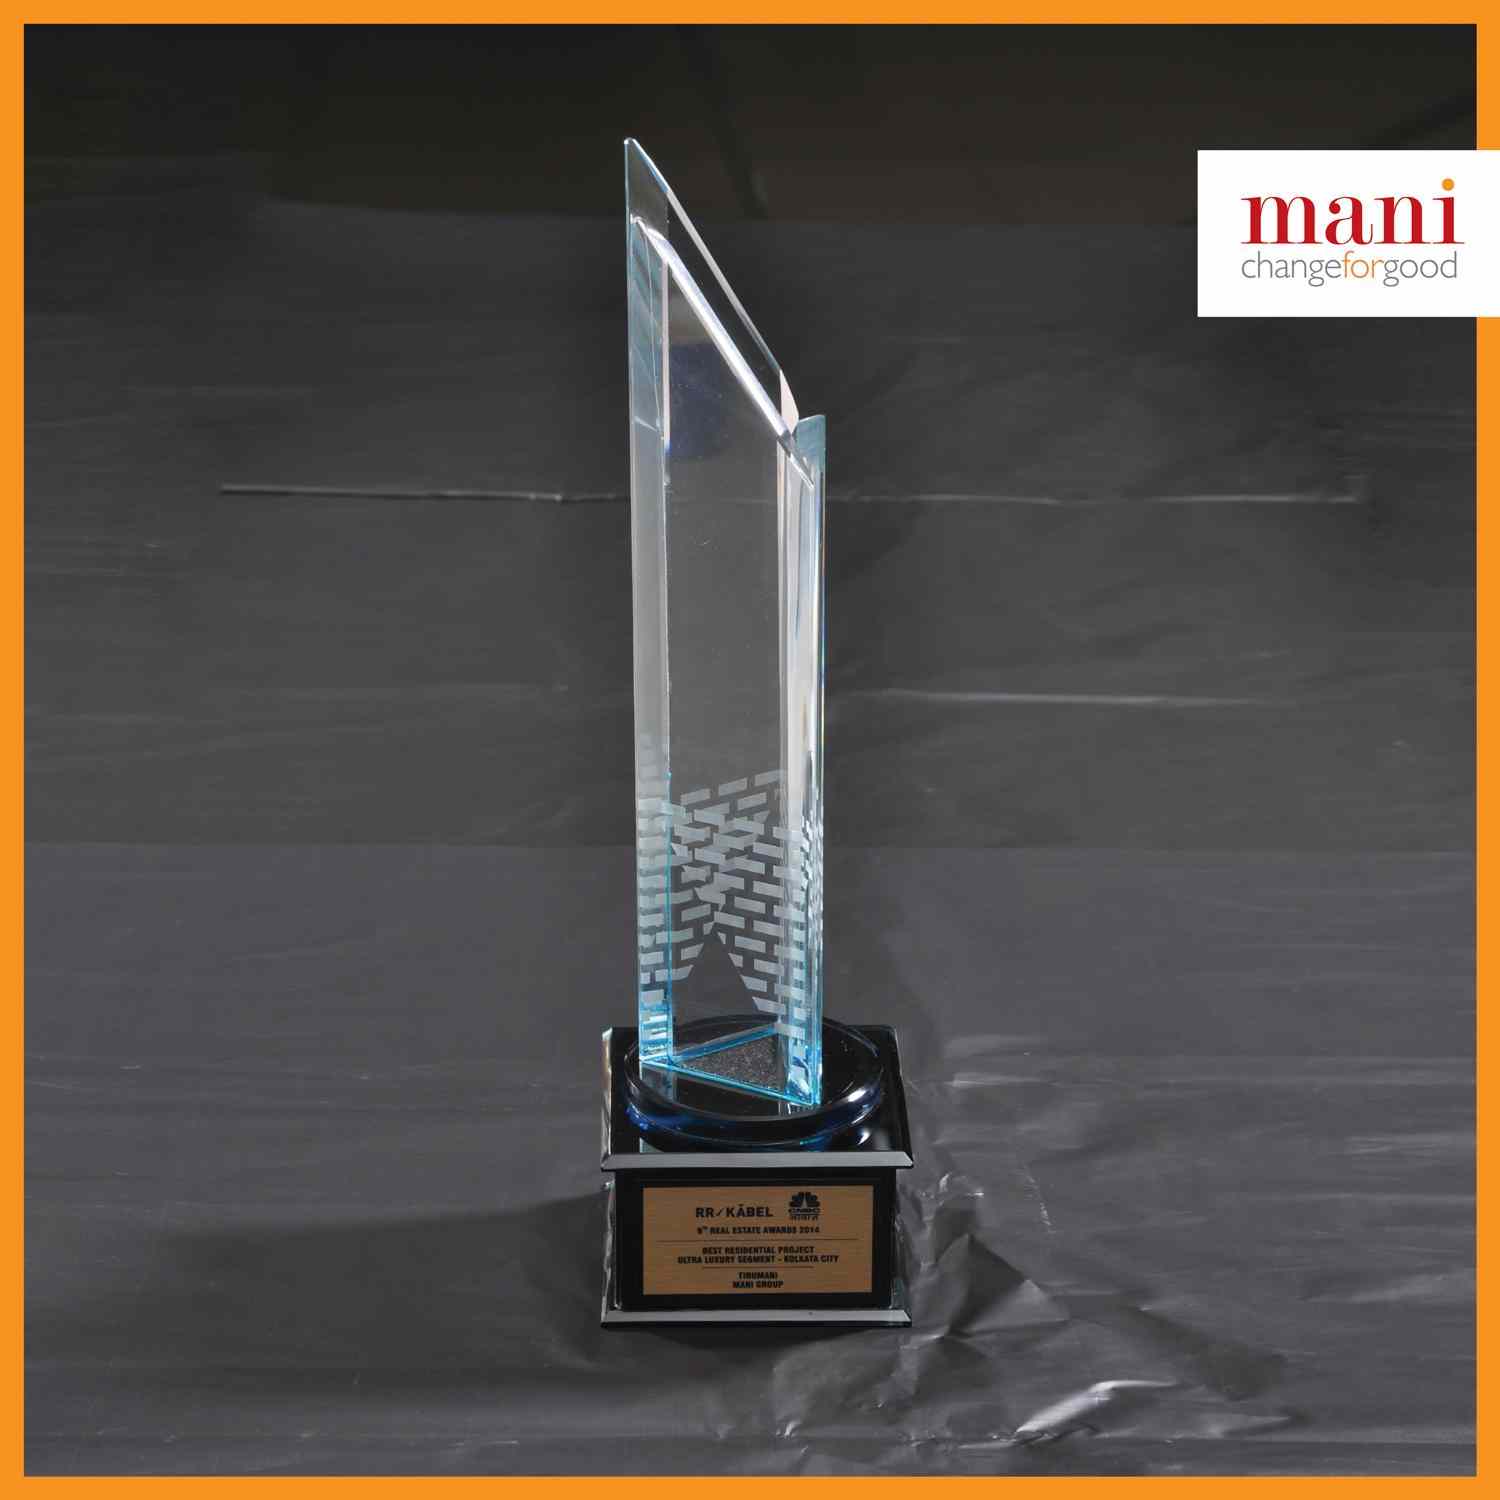 Swarnamani awarded Best Upcoming Luxury Residential Project at CREDAI Bengal Realty Awards 2015 Update